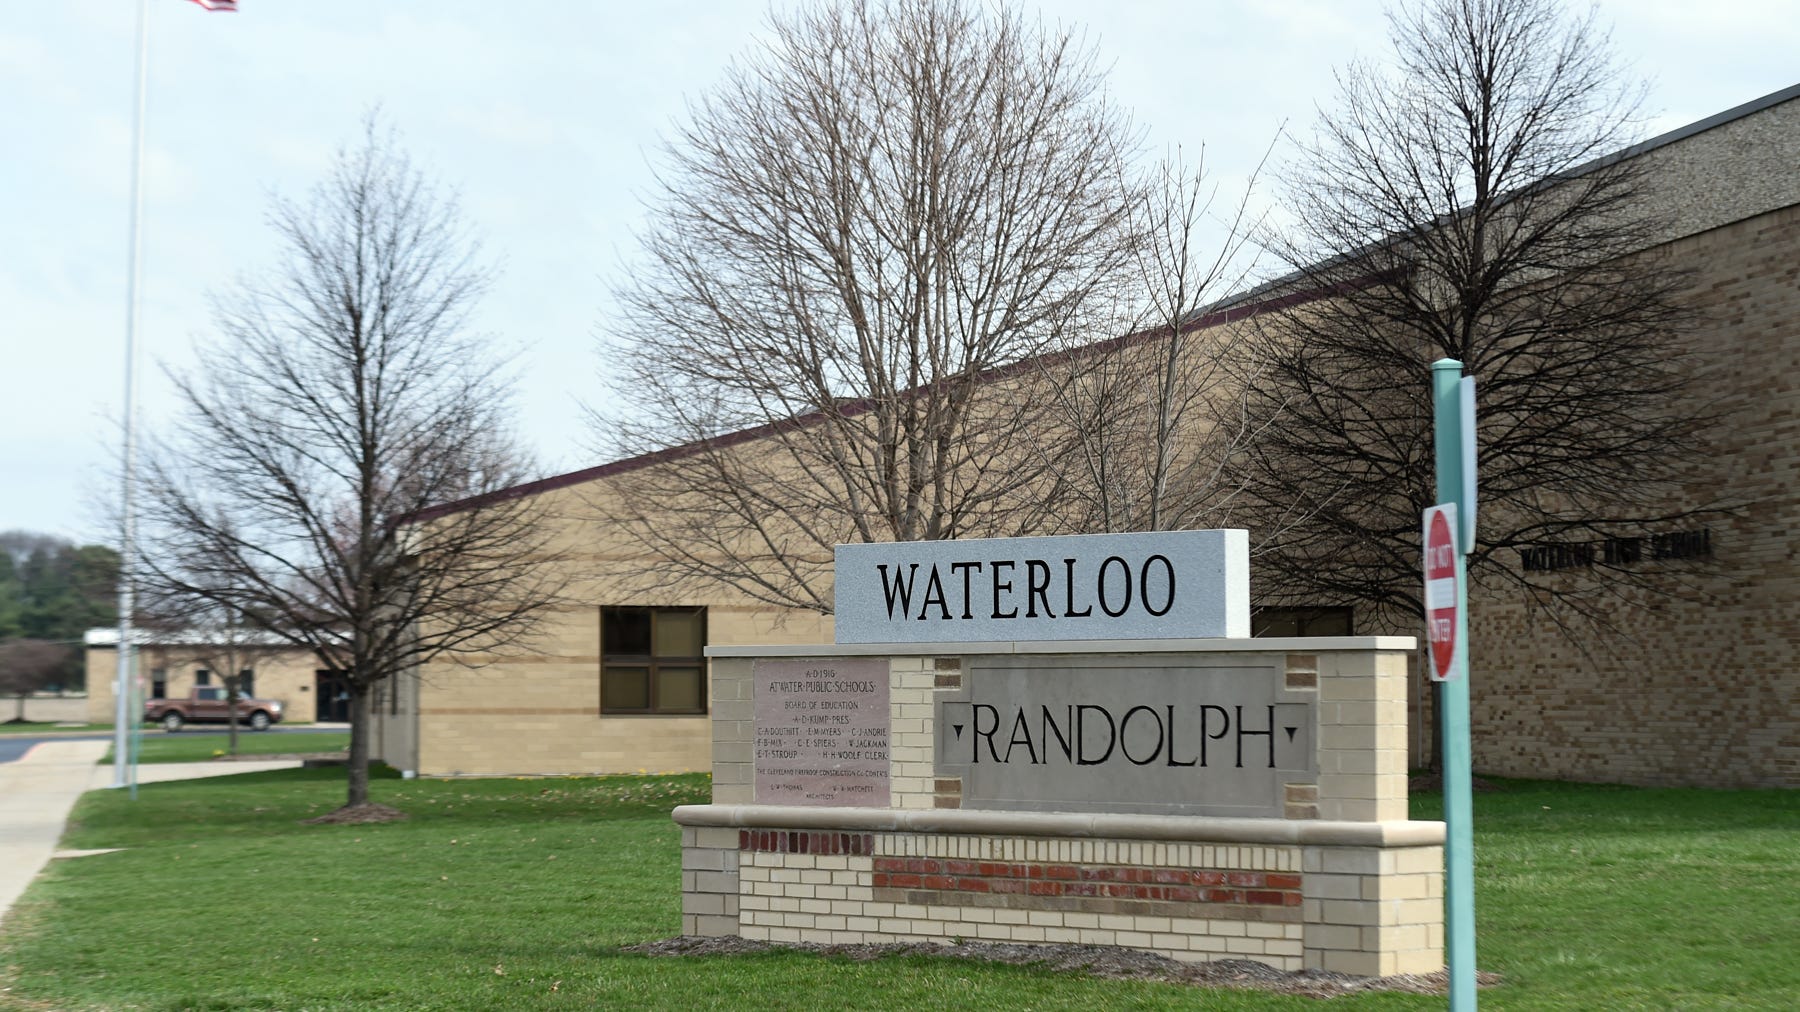 Waterloo asks voters to approve 1.5% earned income tax